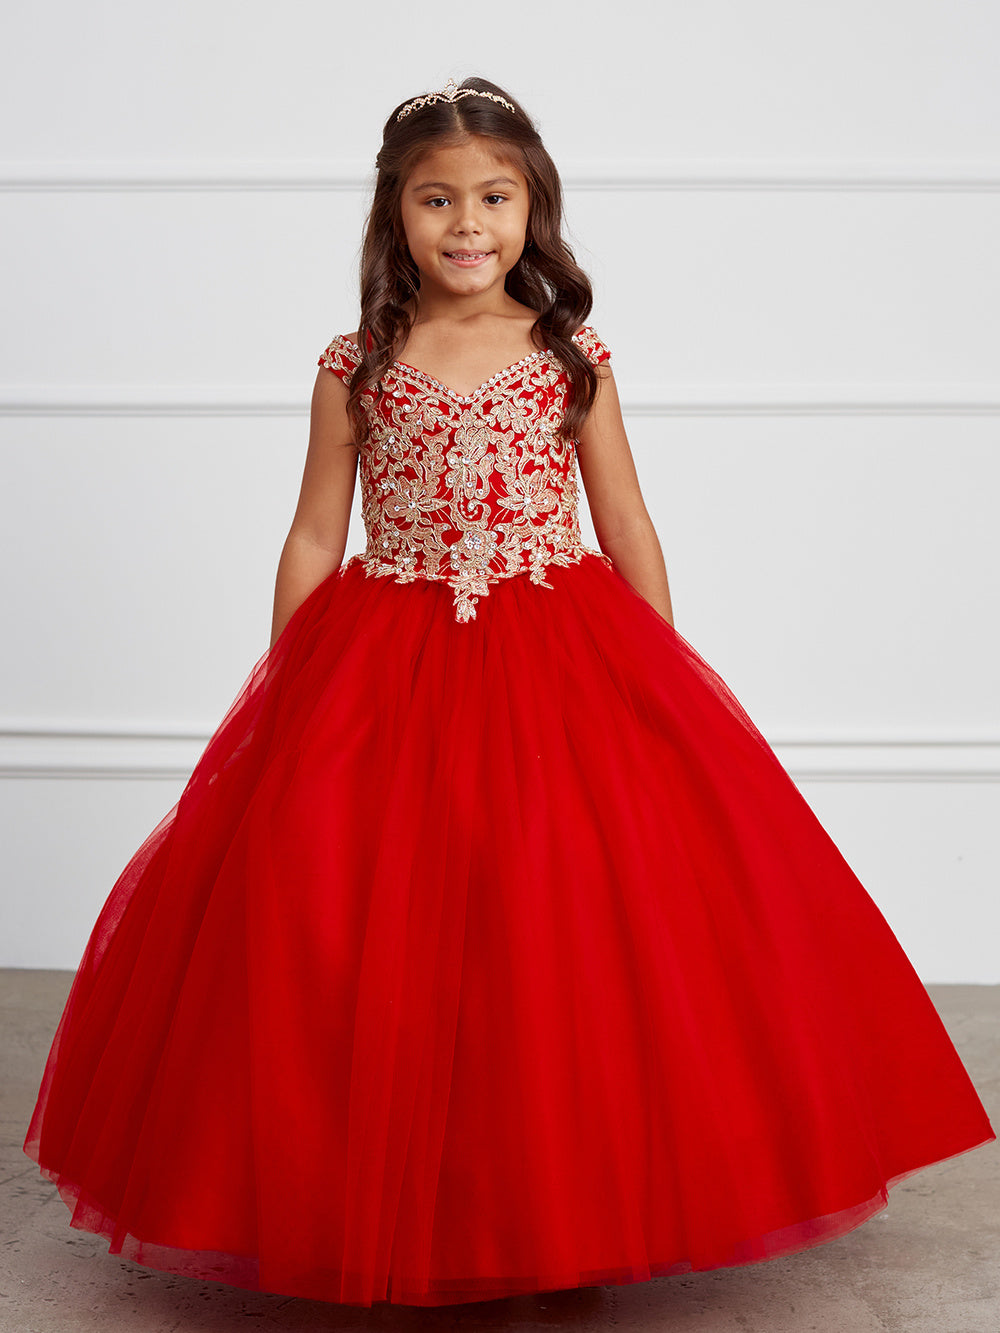 Lady in red - Queen style sleeves red sparkle ball gown wedding dress with  beadings & glitter tulle